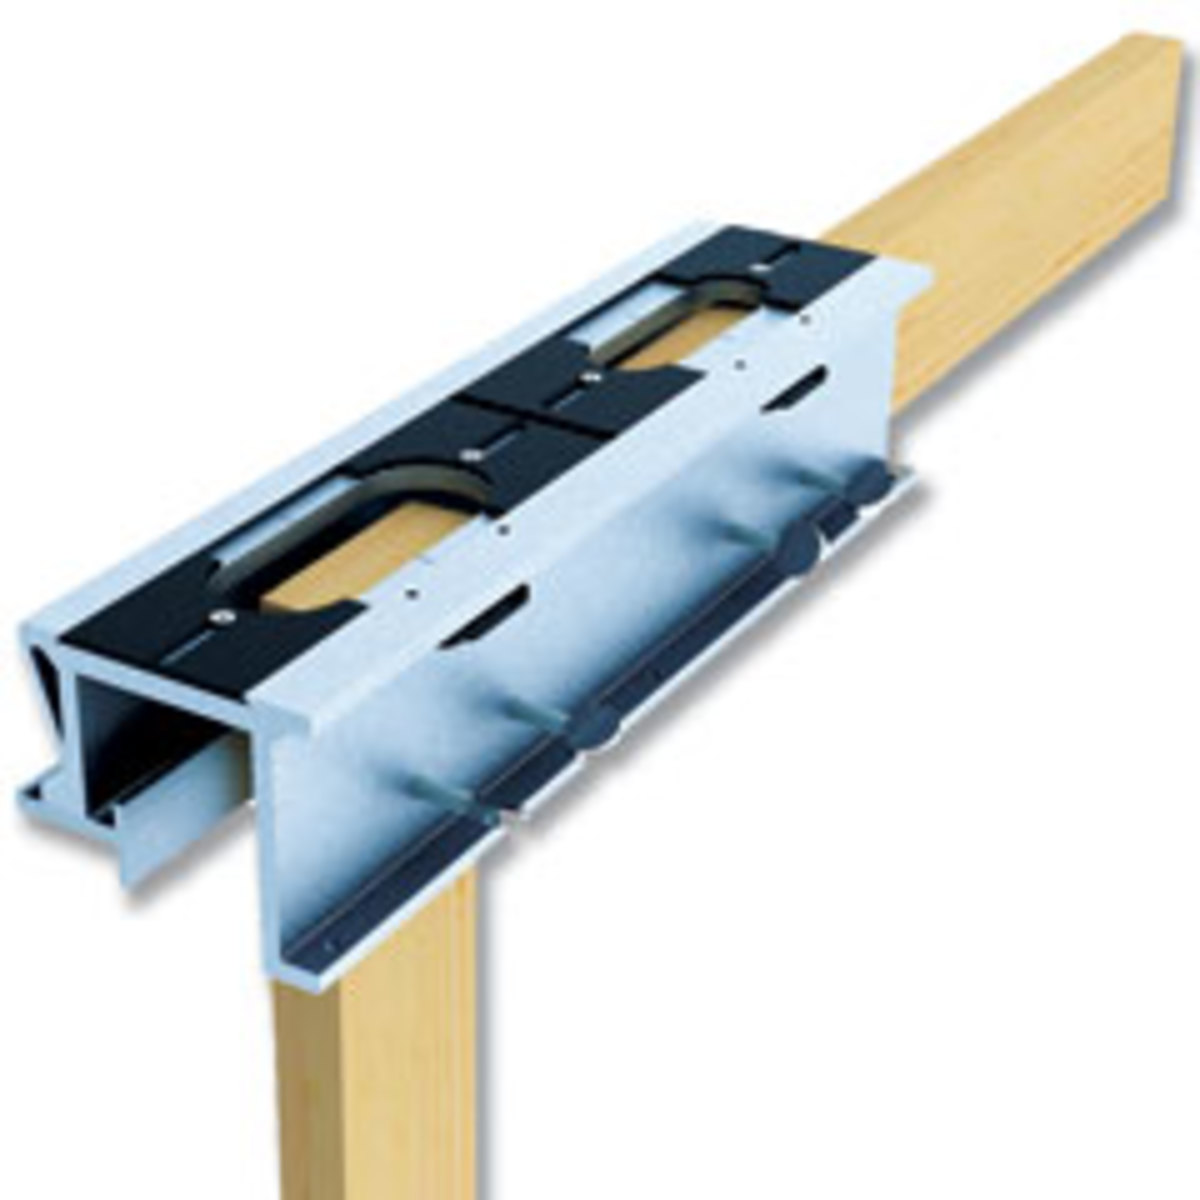 The E-Z Pro Mortise & Tenon Jig, available from General Tools & Instruments.